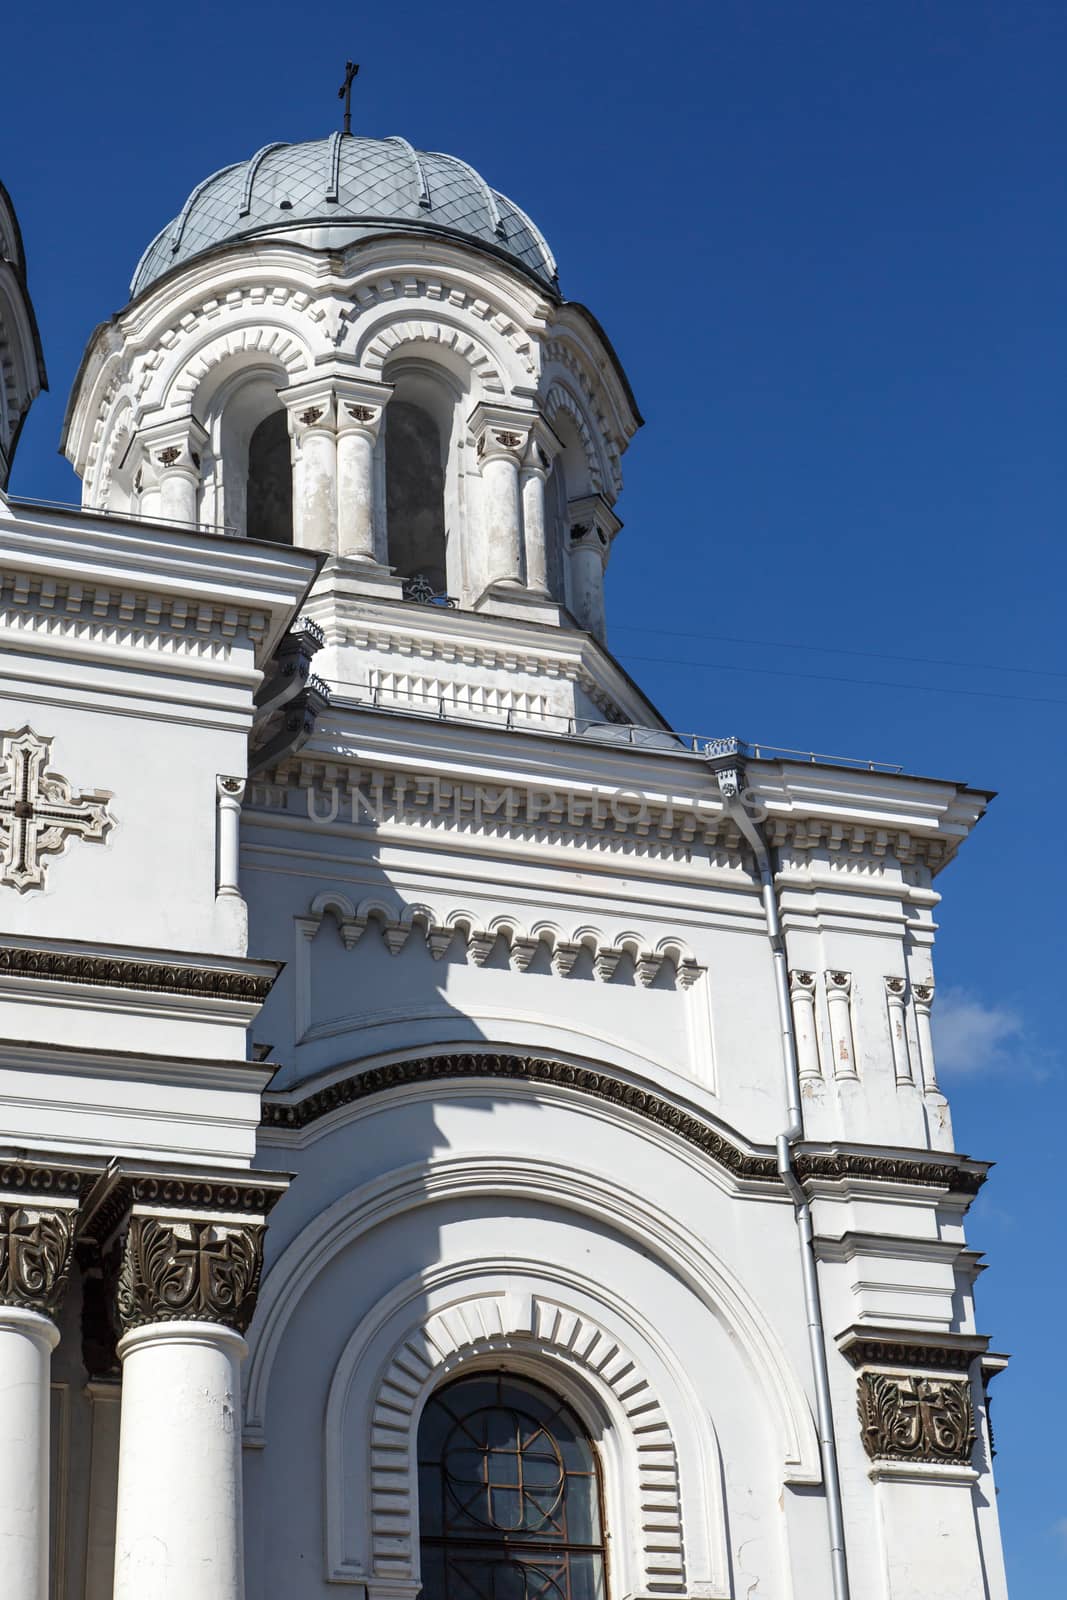 Close up view of catholic roman church named St Micheal the Archangel in Kaunas, on clear navy blue sky background.